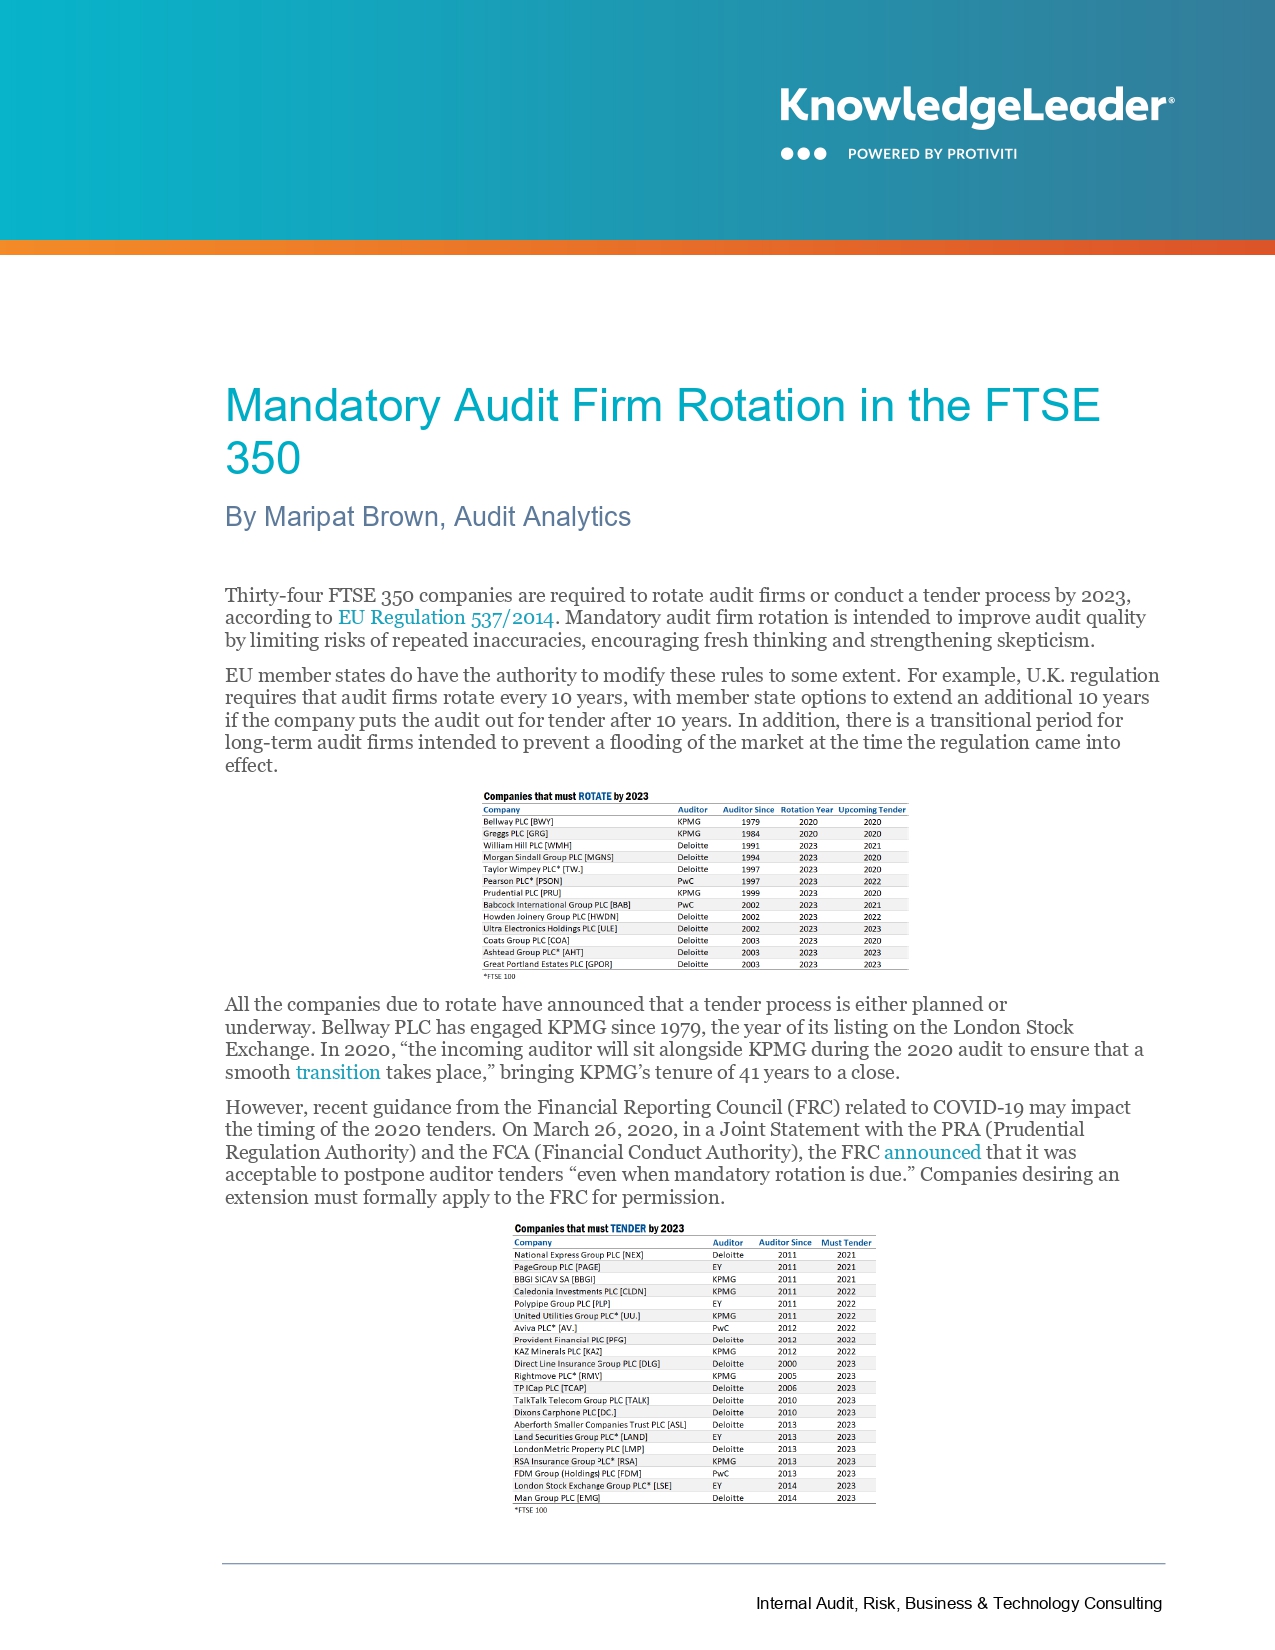 Mandatory Audit Firm Rotation in the FTSE 350